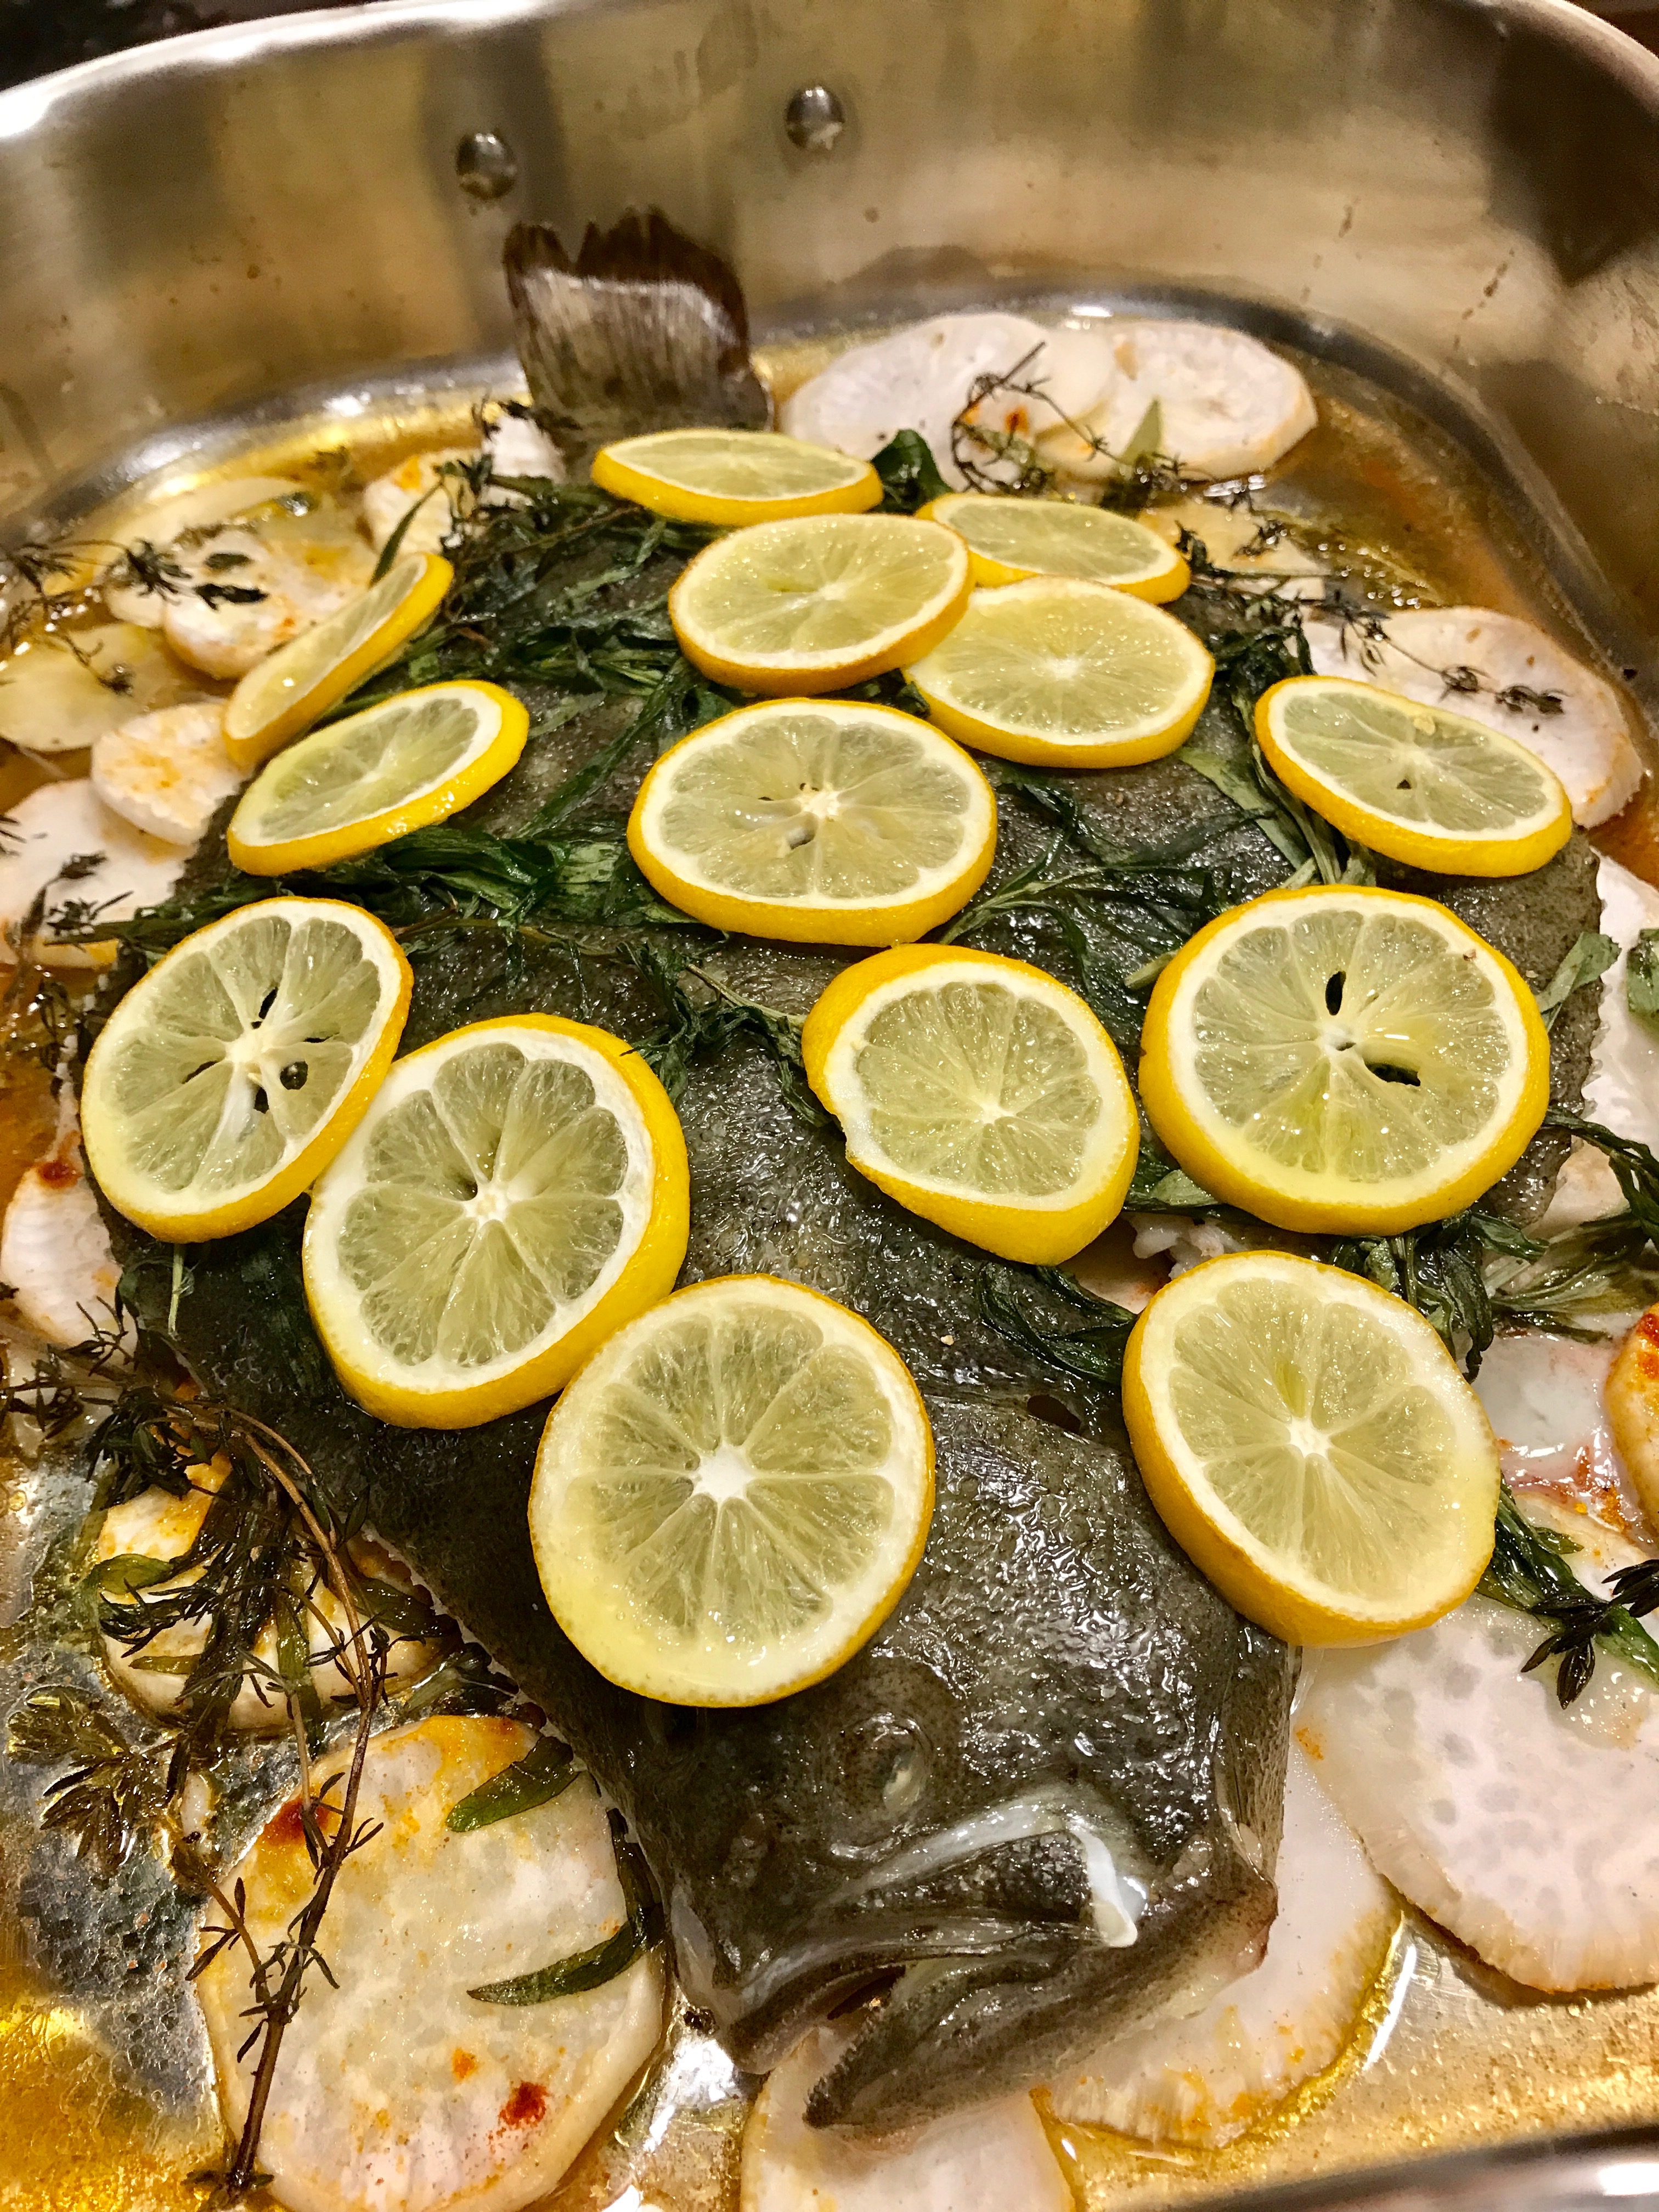 Baked Turbot Fish